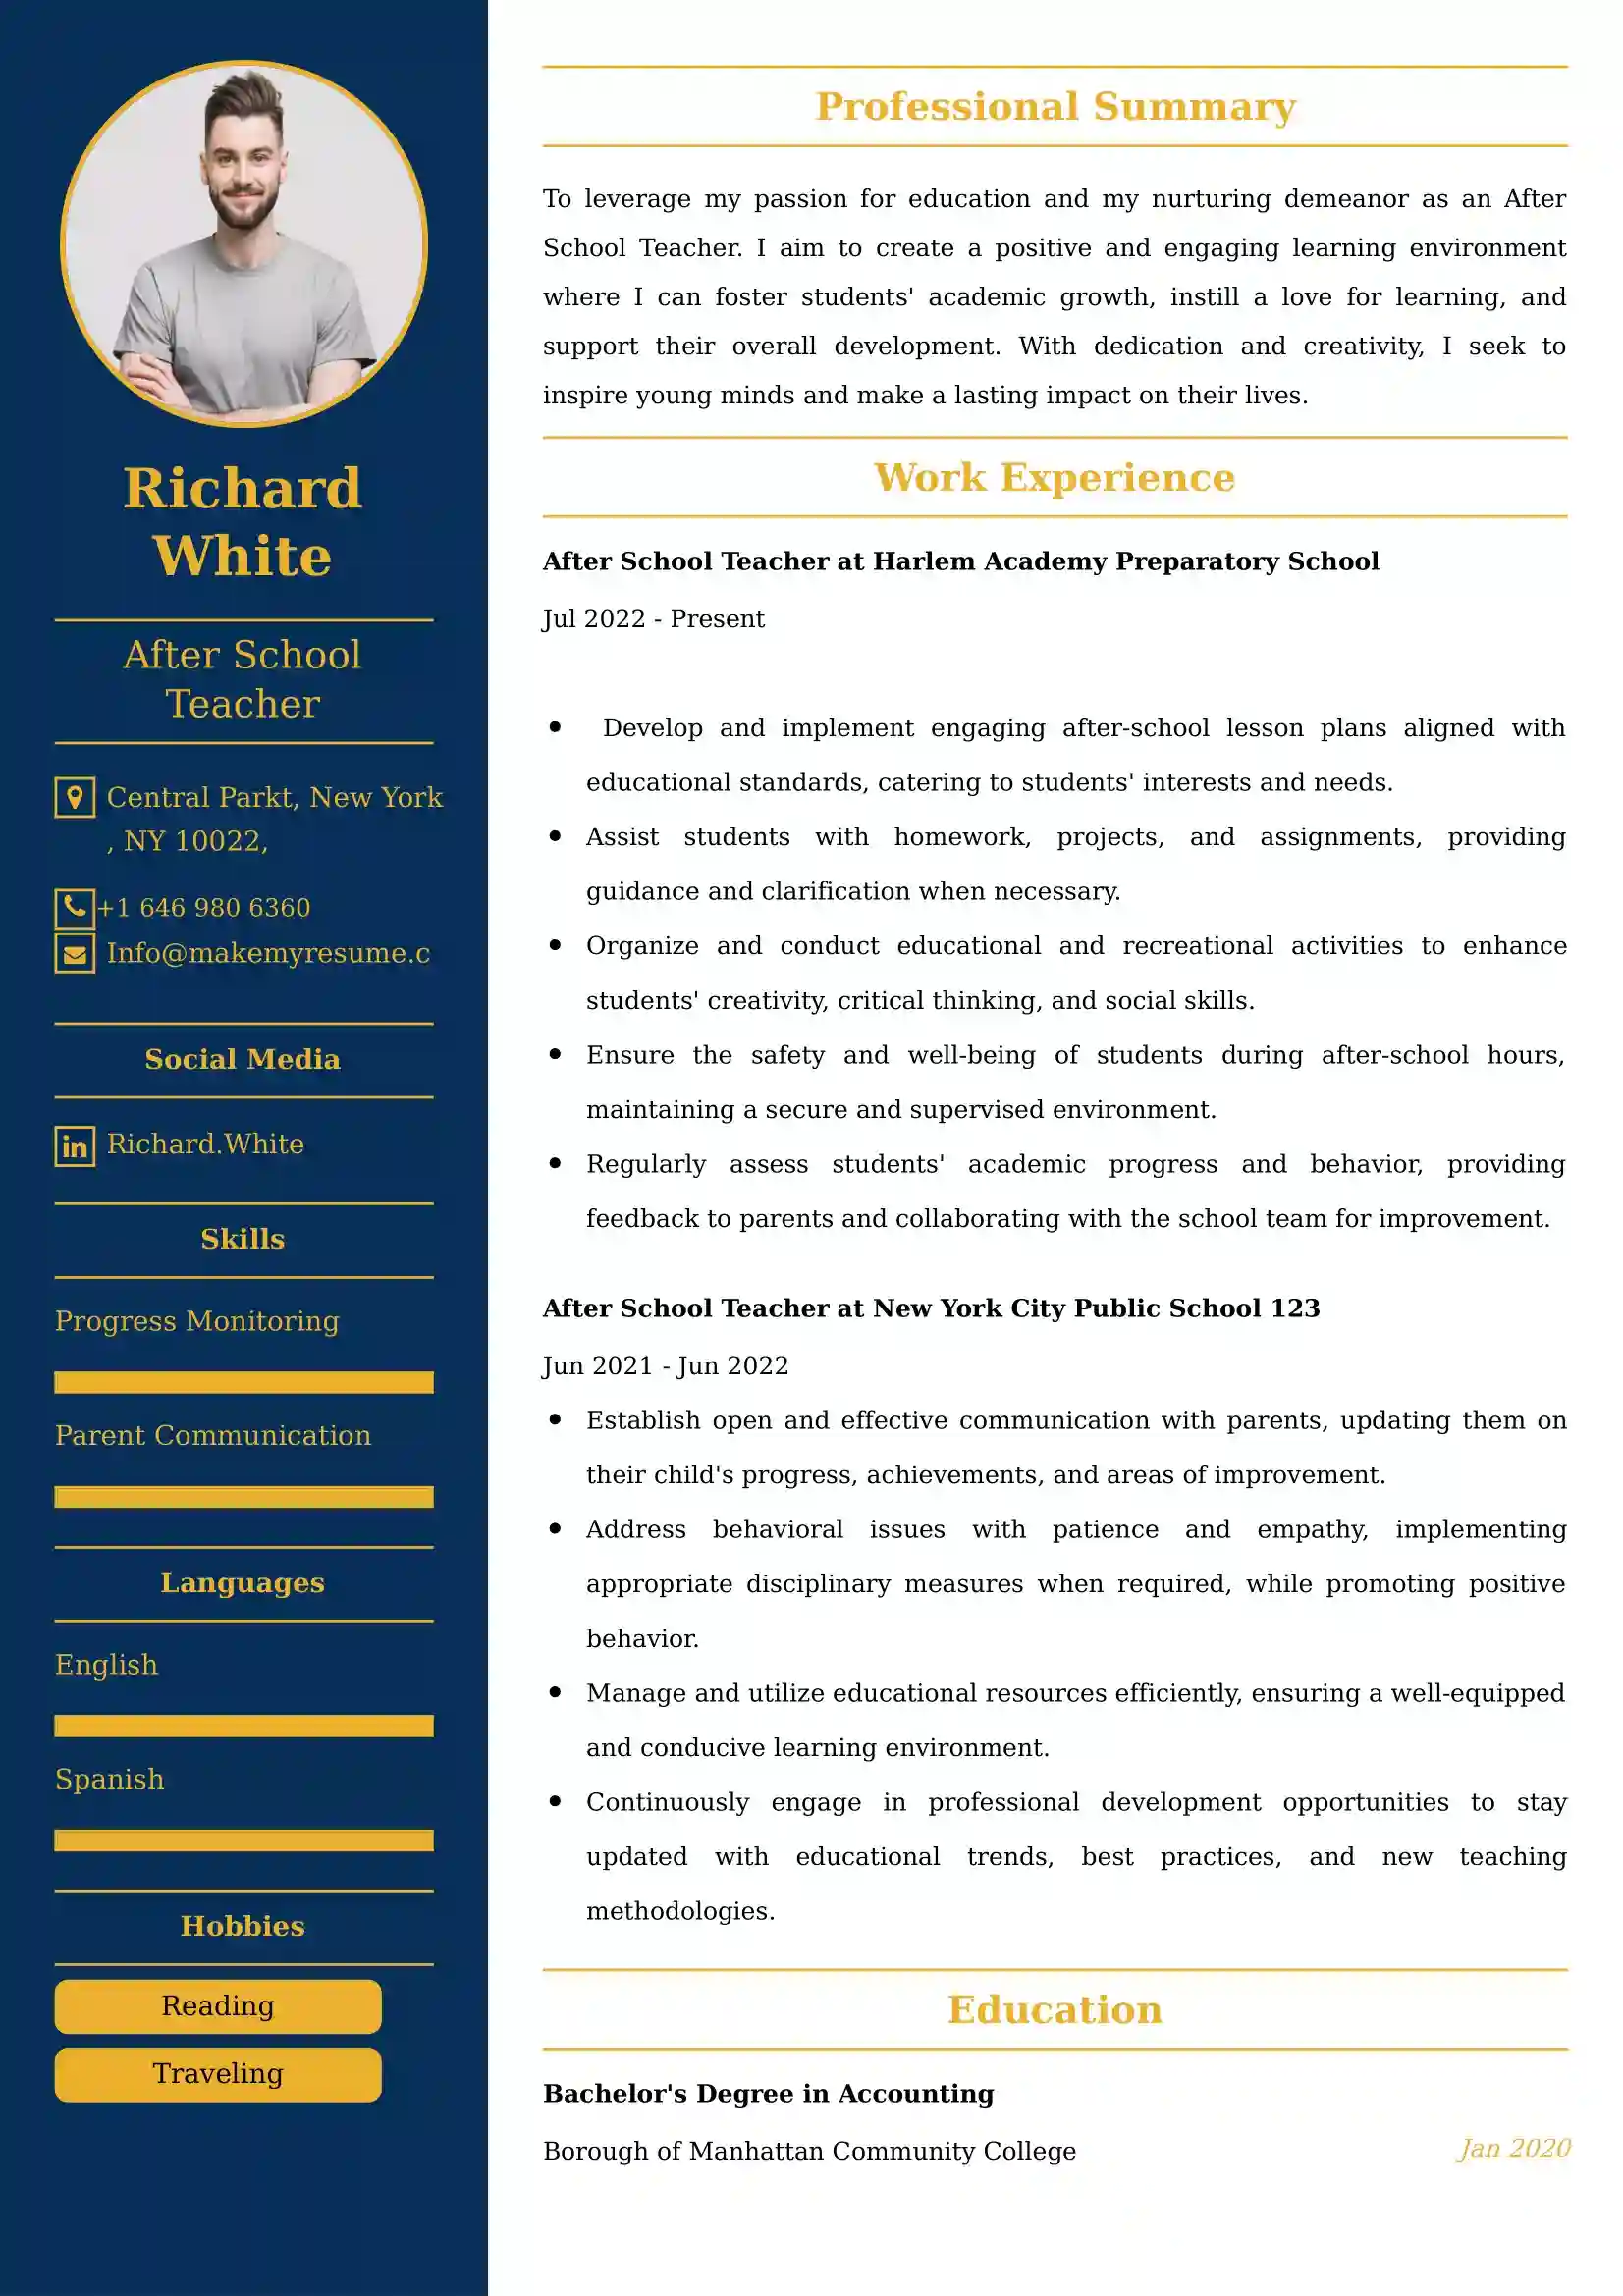 After School Teacher Resume Examples for UK Jobs - Tips and Guide